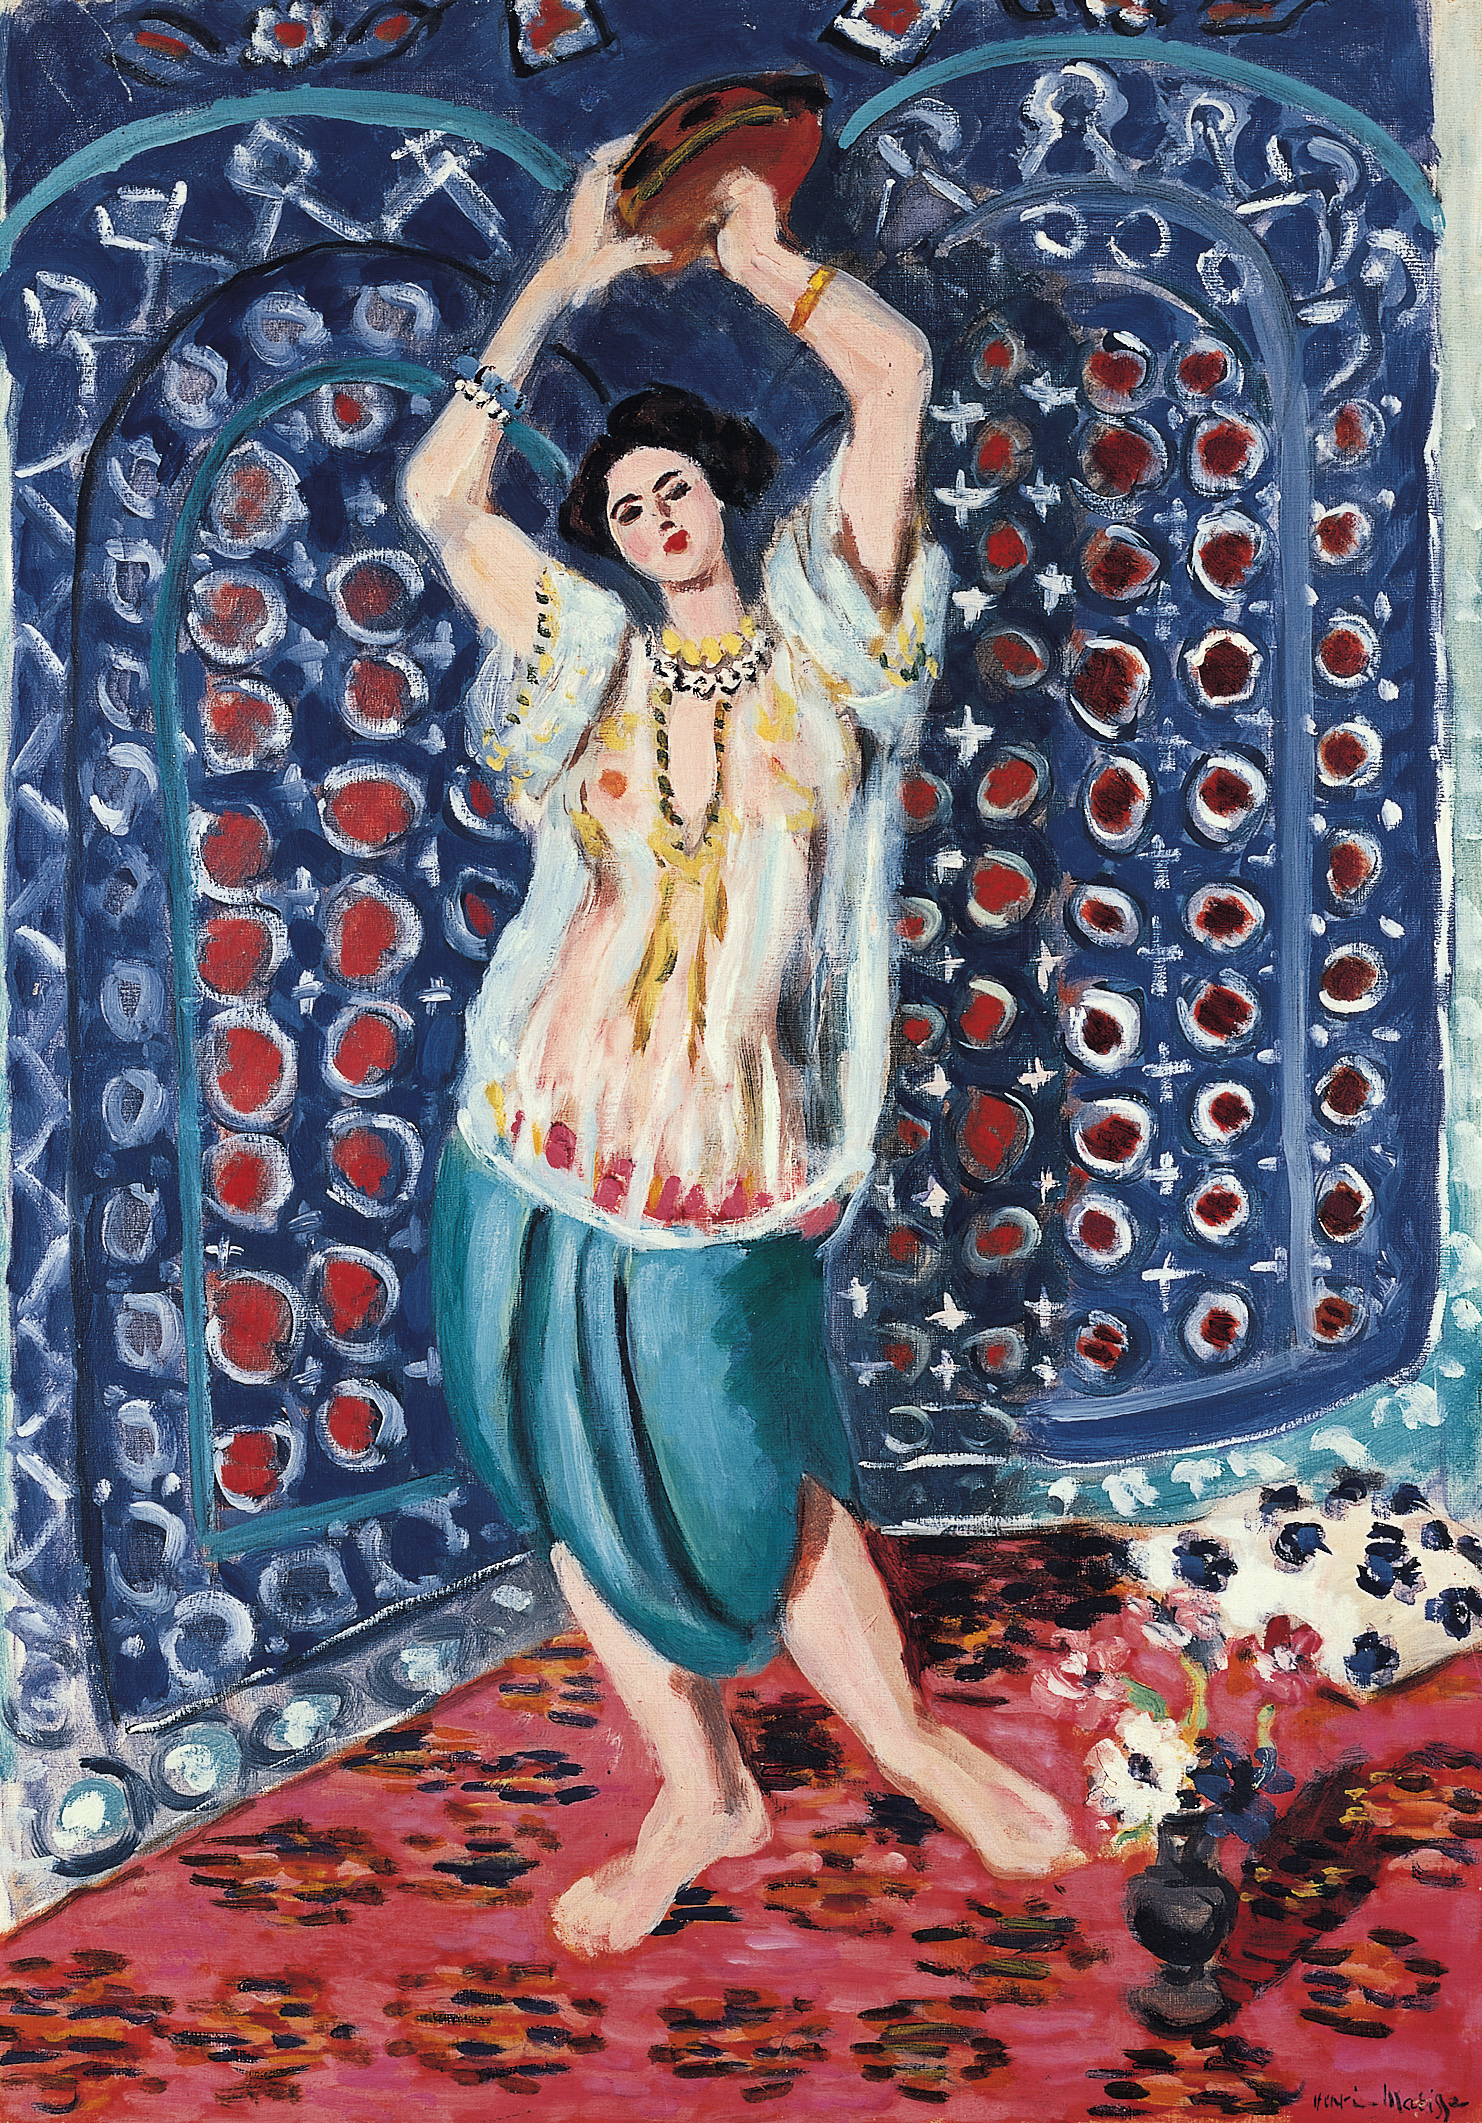 Henri Matisse (French, 1869-1954) Odalisque with Tambourine (Harmony in Blue), 1926 Oil on canvas
36-1/4 x 25-5/8 in. (92.1 x 65.1 cm) Norton Simon Art Foundation © 2019 Succession H. Matisse/ Artists Rights Society (ARS), New York